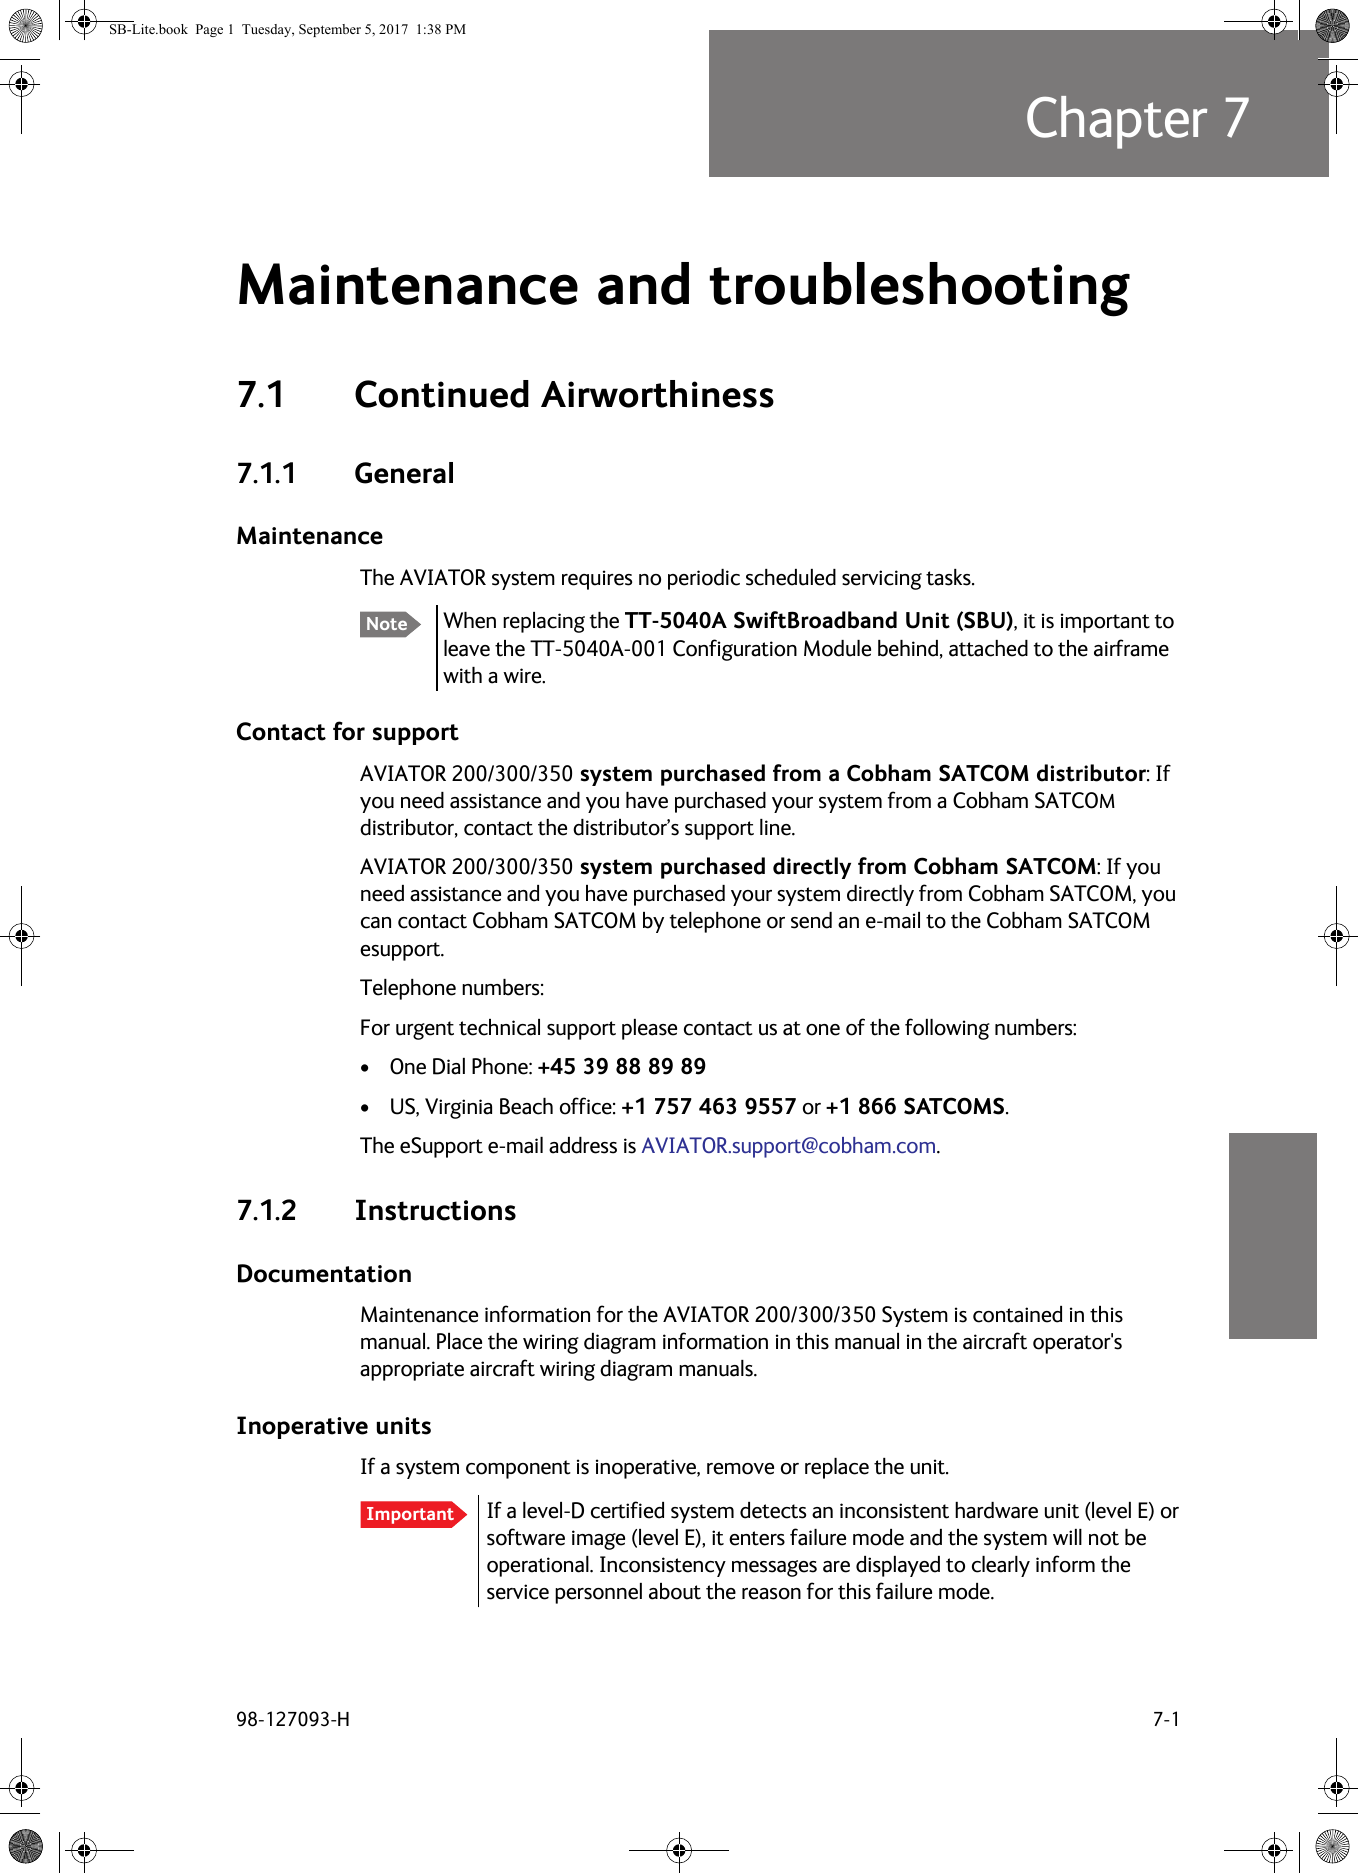 98-127093-H 7-1Chapter 77777Maintenance and troubleshooting 77.1 Continued Airworthiness7.1.1 GeneralMaintenanceThe AVIATOR system requires no periodic scheduled servicing tasks.   When replacing the TT-5040A SwiftBroadband Unit (SBU), it is important to leave the TT-5040A-001 Configuration Module behind, attached to the airframe with a wire.Contact for supportAVIATOR  200/300/350 system purchased from a Cobham SATCOM distributor: If you need assistance and you have purchased your system from a Cobham SATCOM distributor, contact the distributor’s support line.AVIATOR  200/300/350 system purchased directly from Cobham SATCOM: If you need assistance and you have purchased your system directly from Cobham SATCOM, you can contact Cobham SATCOM by telephone or send an e-mail to the Cobham SATCOM esupport.Telephone numbers:For urgent technical support please contact us at one of the following numbers:• One Dial Phone: +45 39 88 89 89• US, Virginia Beach office: +1 757 463 9557 or +1 866 SATCOMS.The eSupport e-mail address is AVIATOR.support@cobham.com.7.1.2 InstructionsDocumentationMaintenance information for the AVIATOR  200/300/350 System is contained in this manual. Place the wiring diagram information in this manual in the aircraft operator&apos;s appropriate aircraft wiring diagram manuals.Inoperative unitsIf a system component is inoperative, remove or replace the unit.If a level-D certified system detects an inconsistent hardware unit (level E) or software image (level  E), it enters failure mode and the system will not be operational. Inconsistency messages are displayed to clearly inform the service personnel about the reason for this failure mode.NoteImportantSB-Lite.book  Page 1  Tuesday, September 5, 2017  1:38 PM